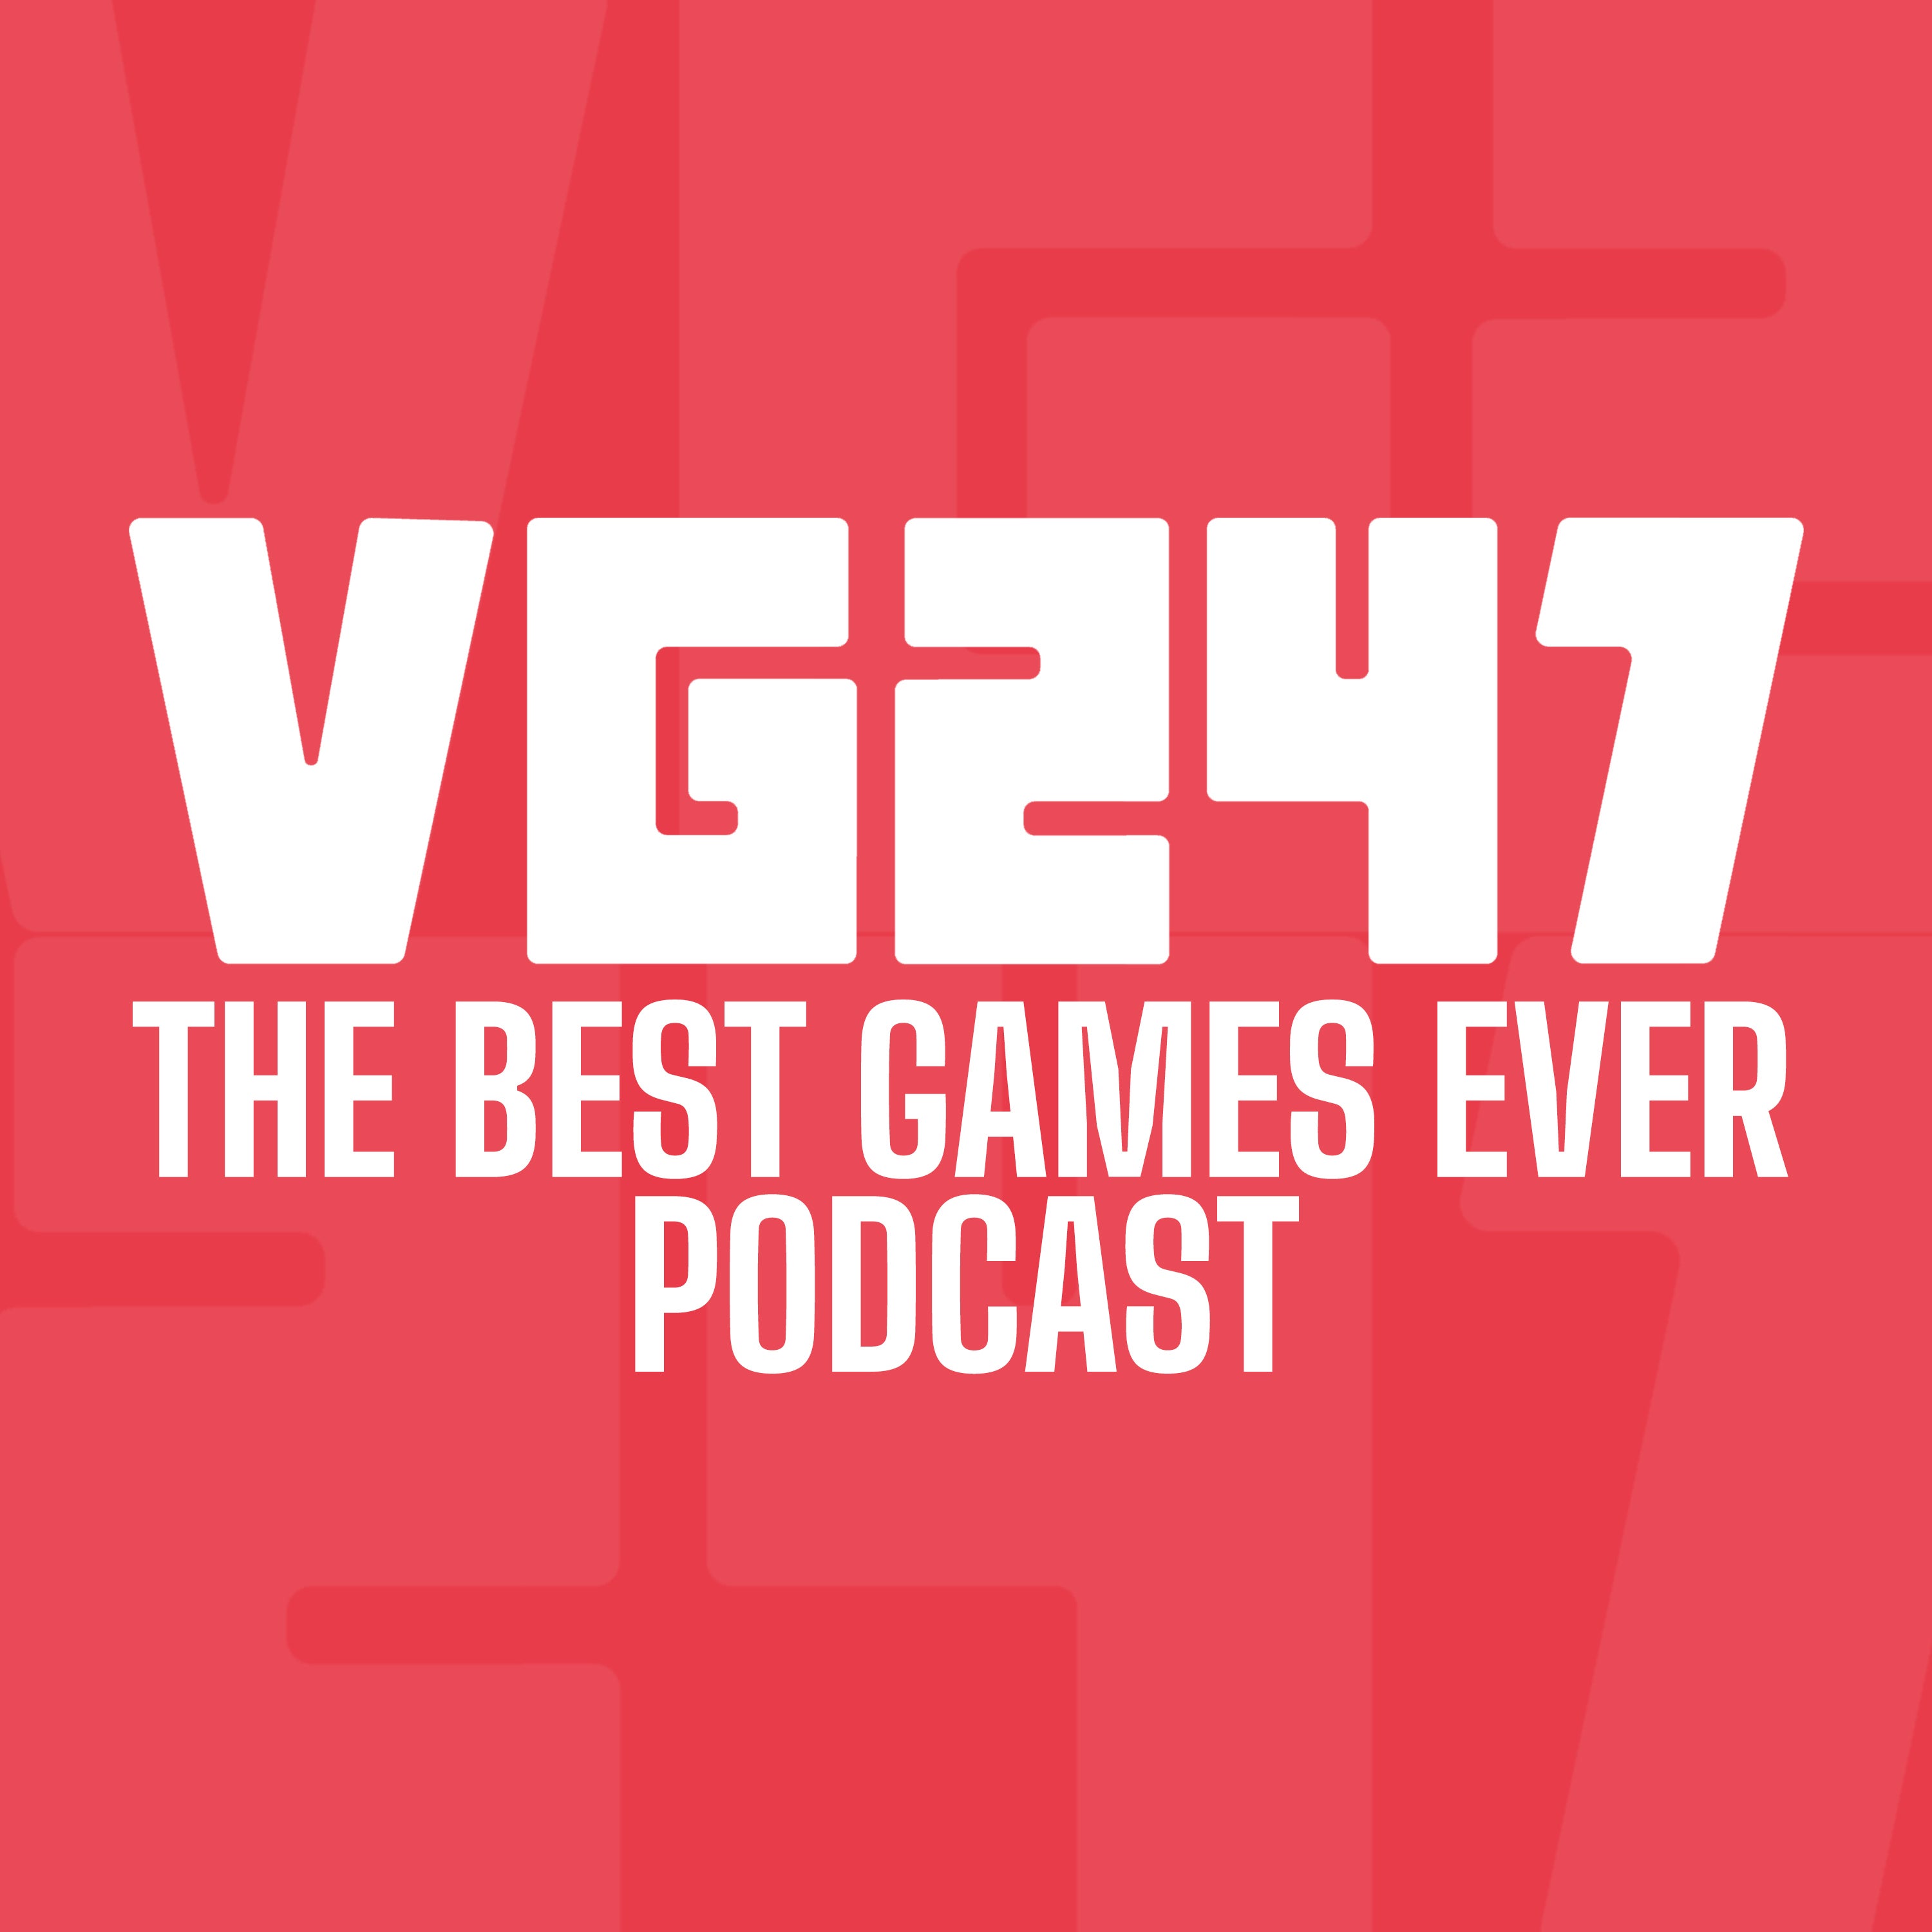 VG247's Best Games Ever podcast logo.  White text on red background.